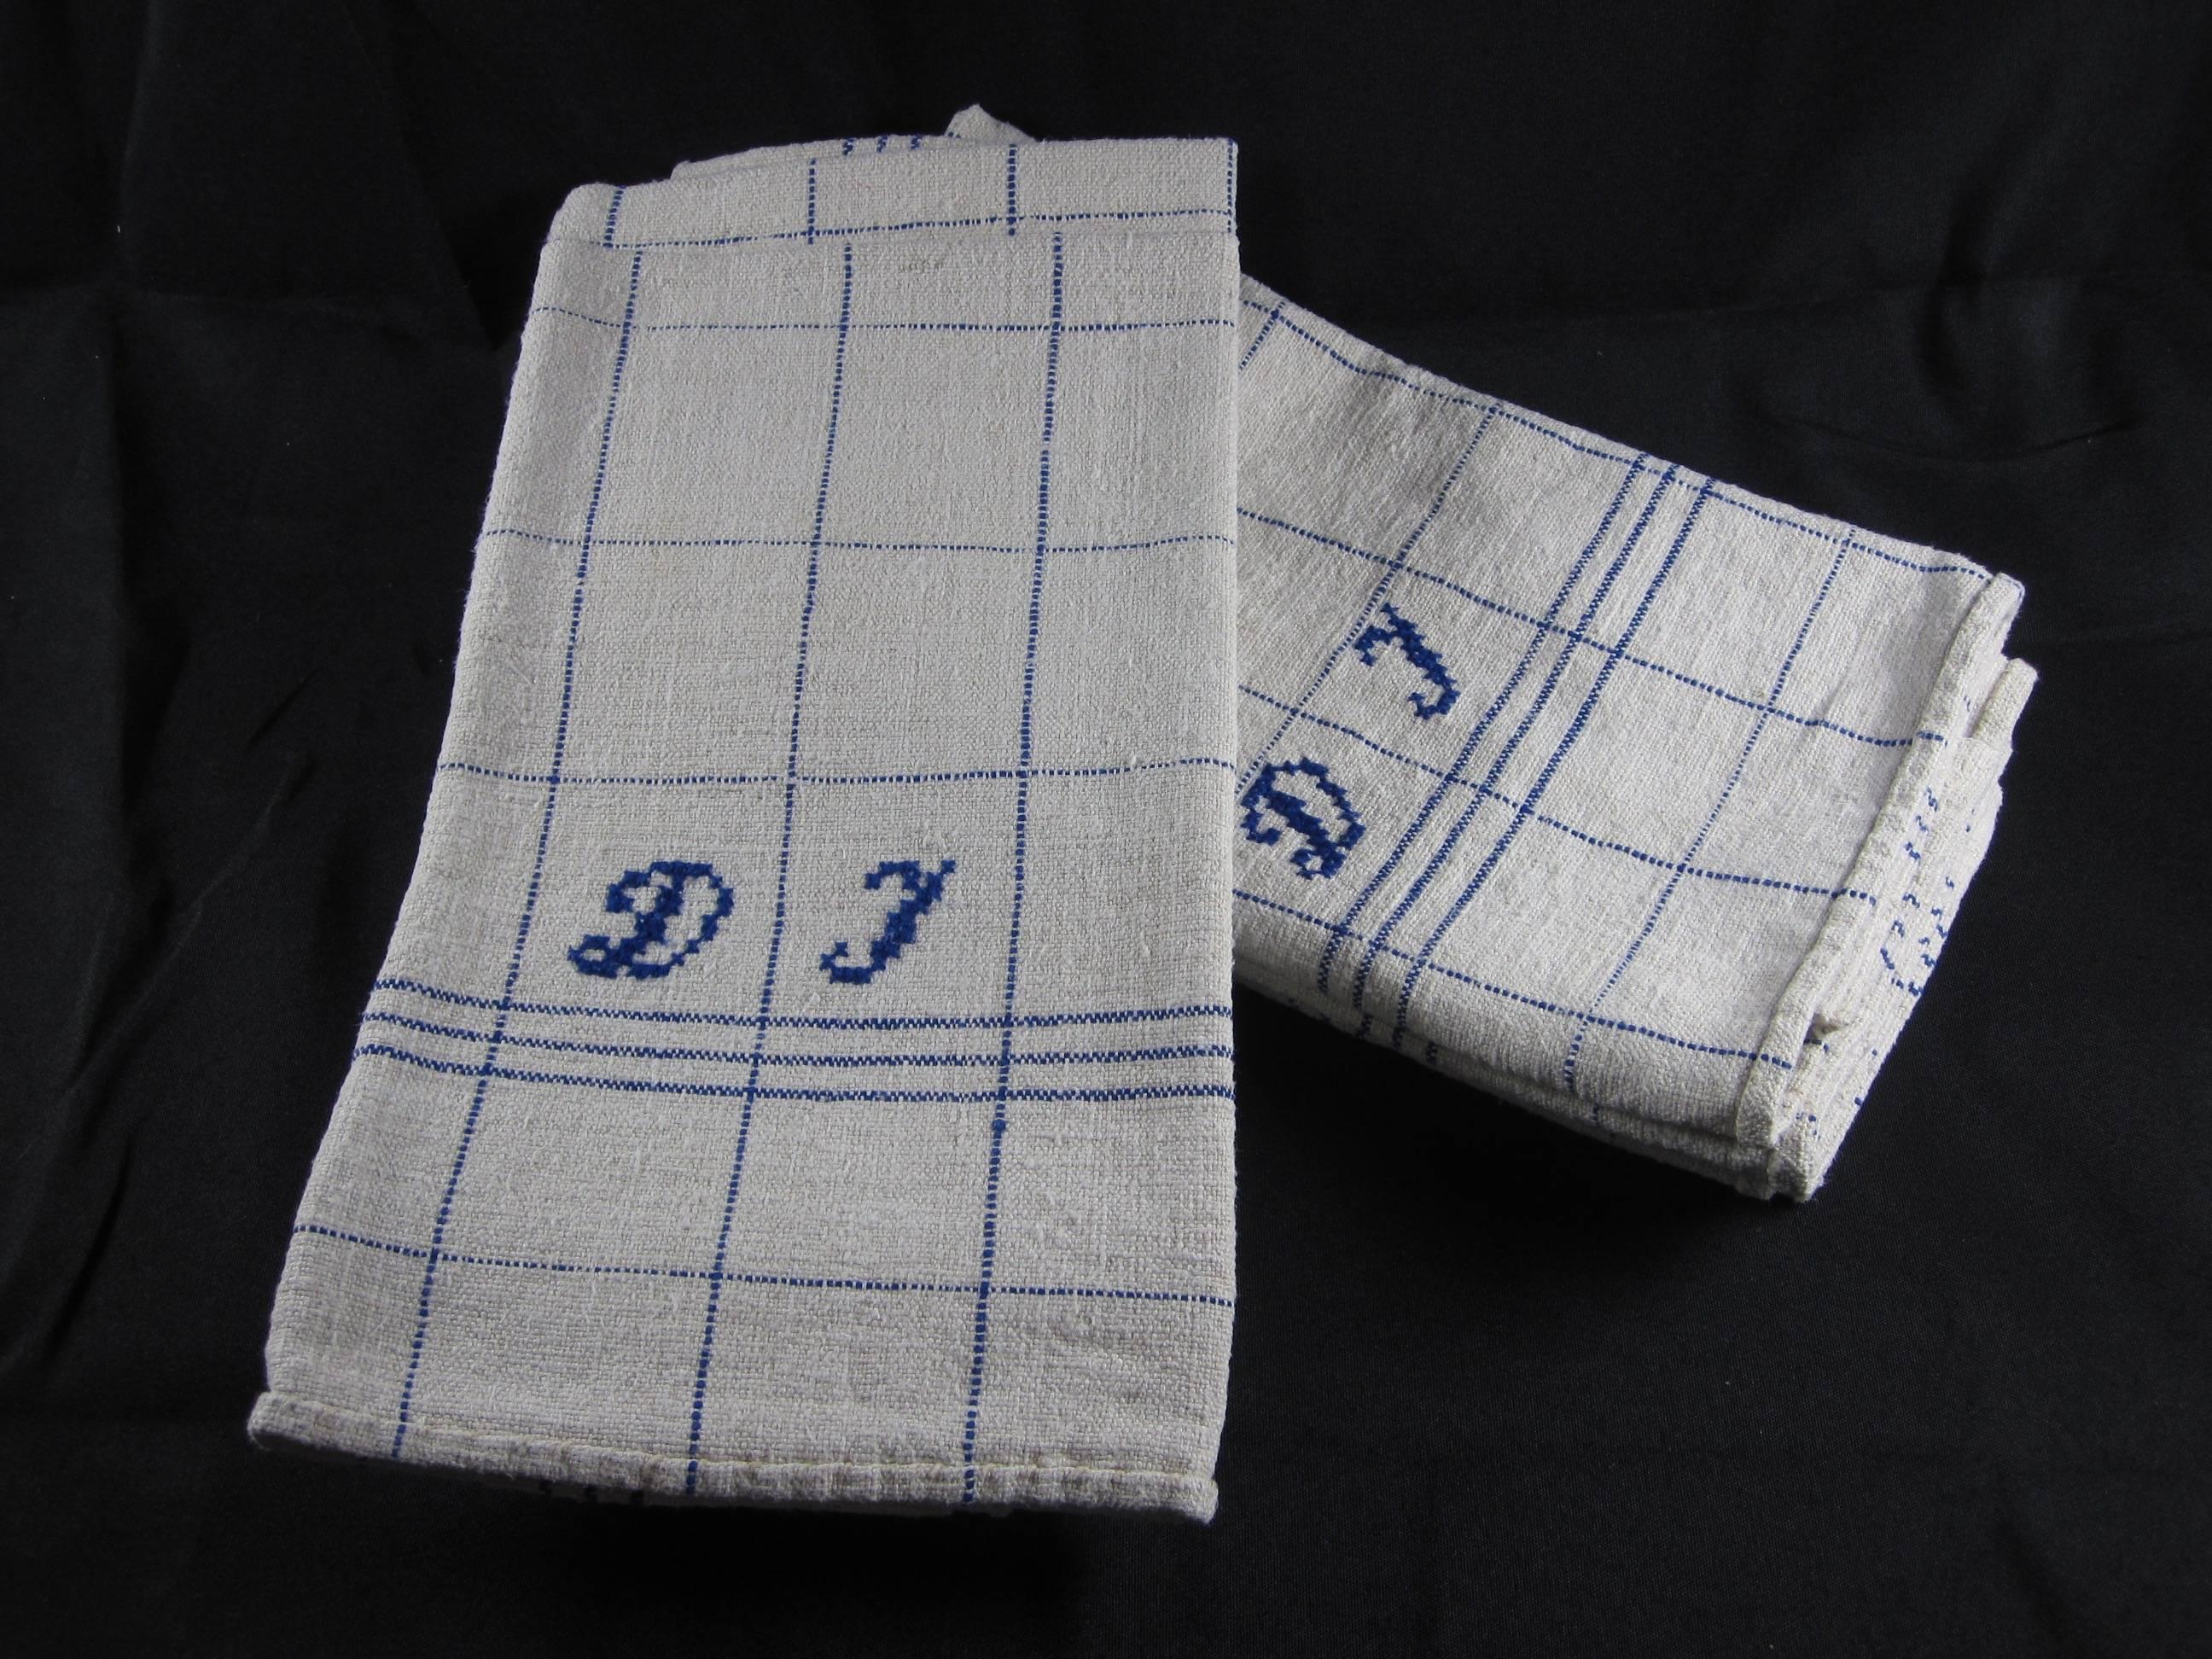 Found in a Provençal Brocante in France, a set of six vintage hand-spun tea towels with blue stripes on natural linen and embroidered with the initials, DJ. Hand-stitched hems, freshly laundered and starched. Wonderful used as large napkins or place